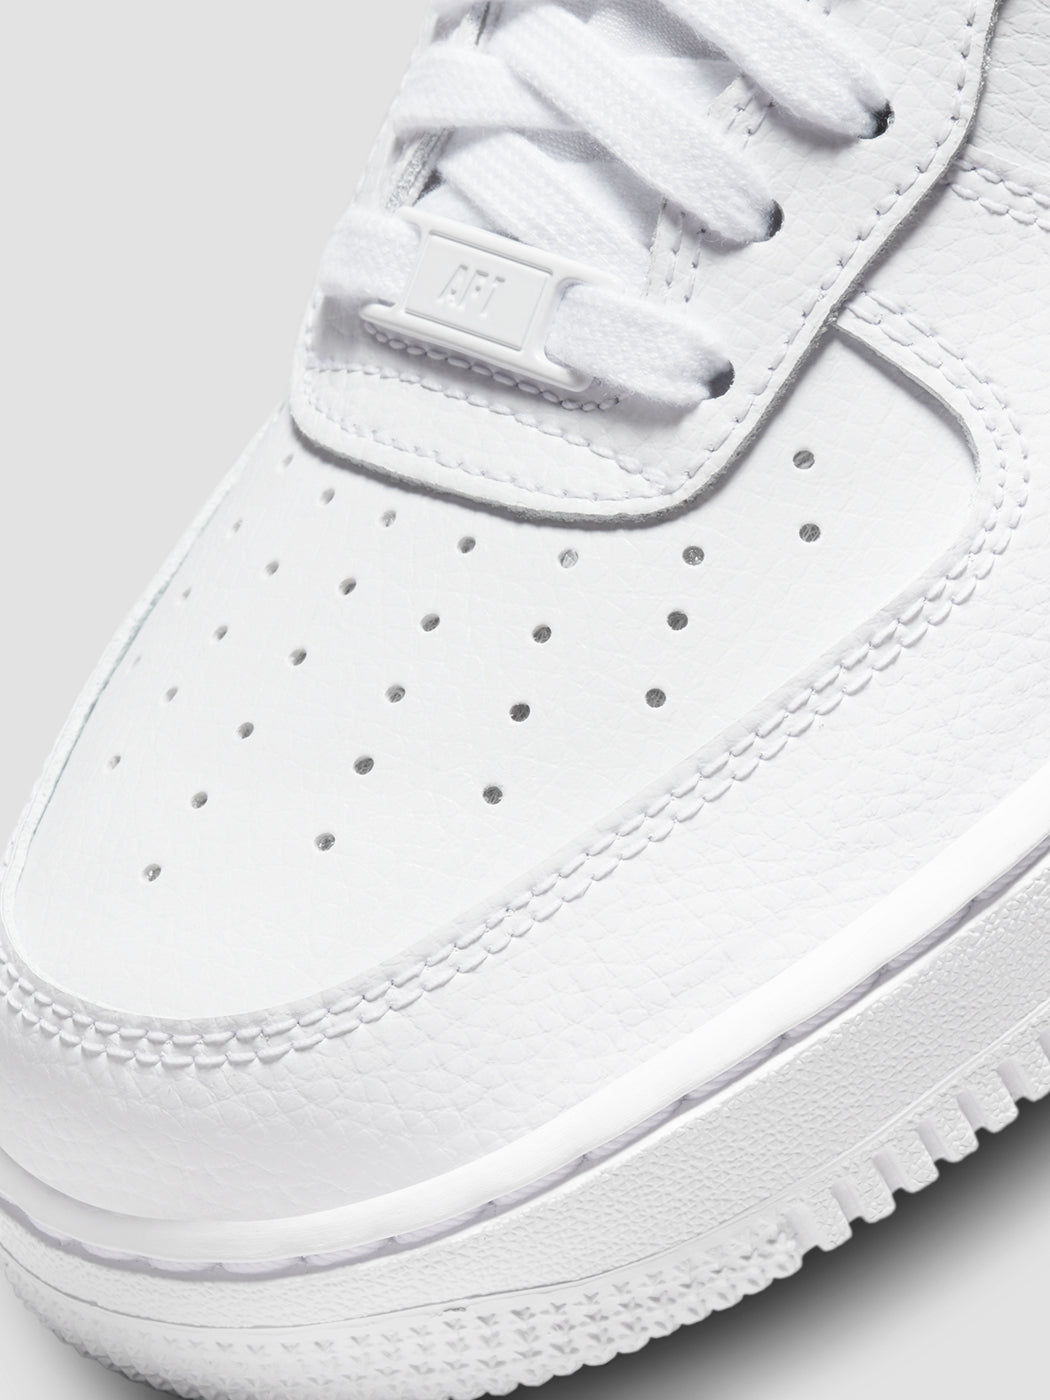 Nike Air Force 1 '07 Sneaker in White - Size 12